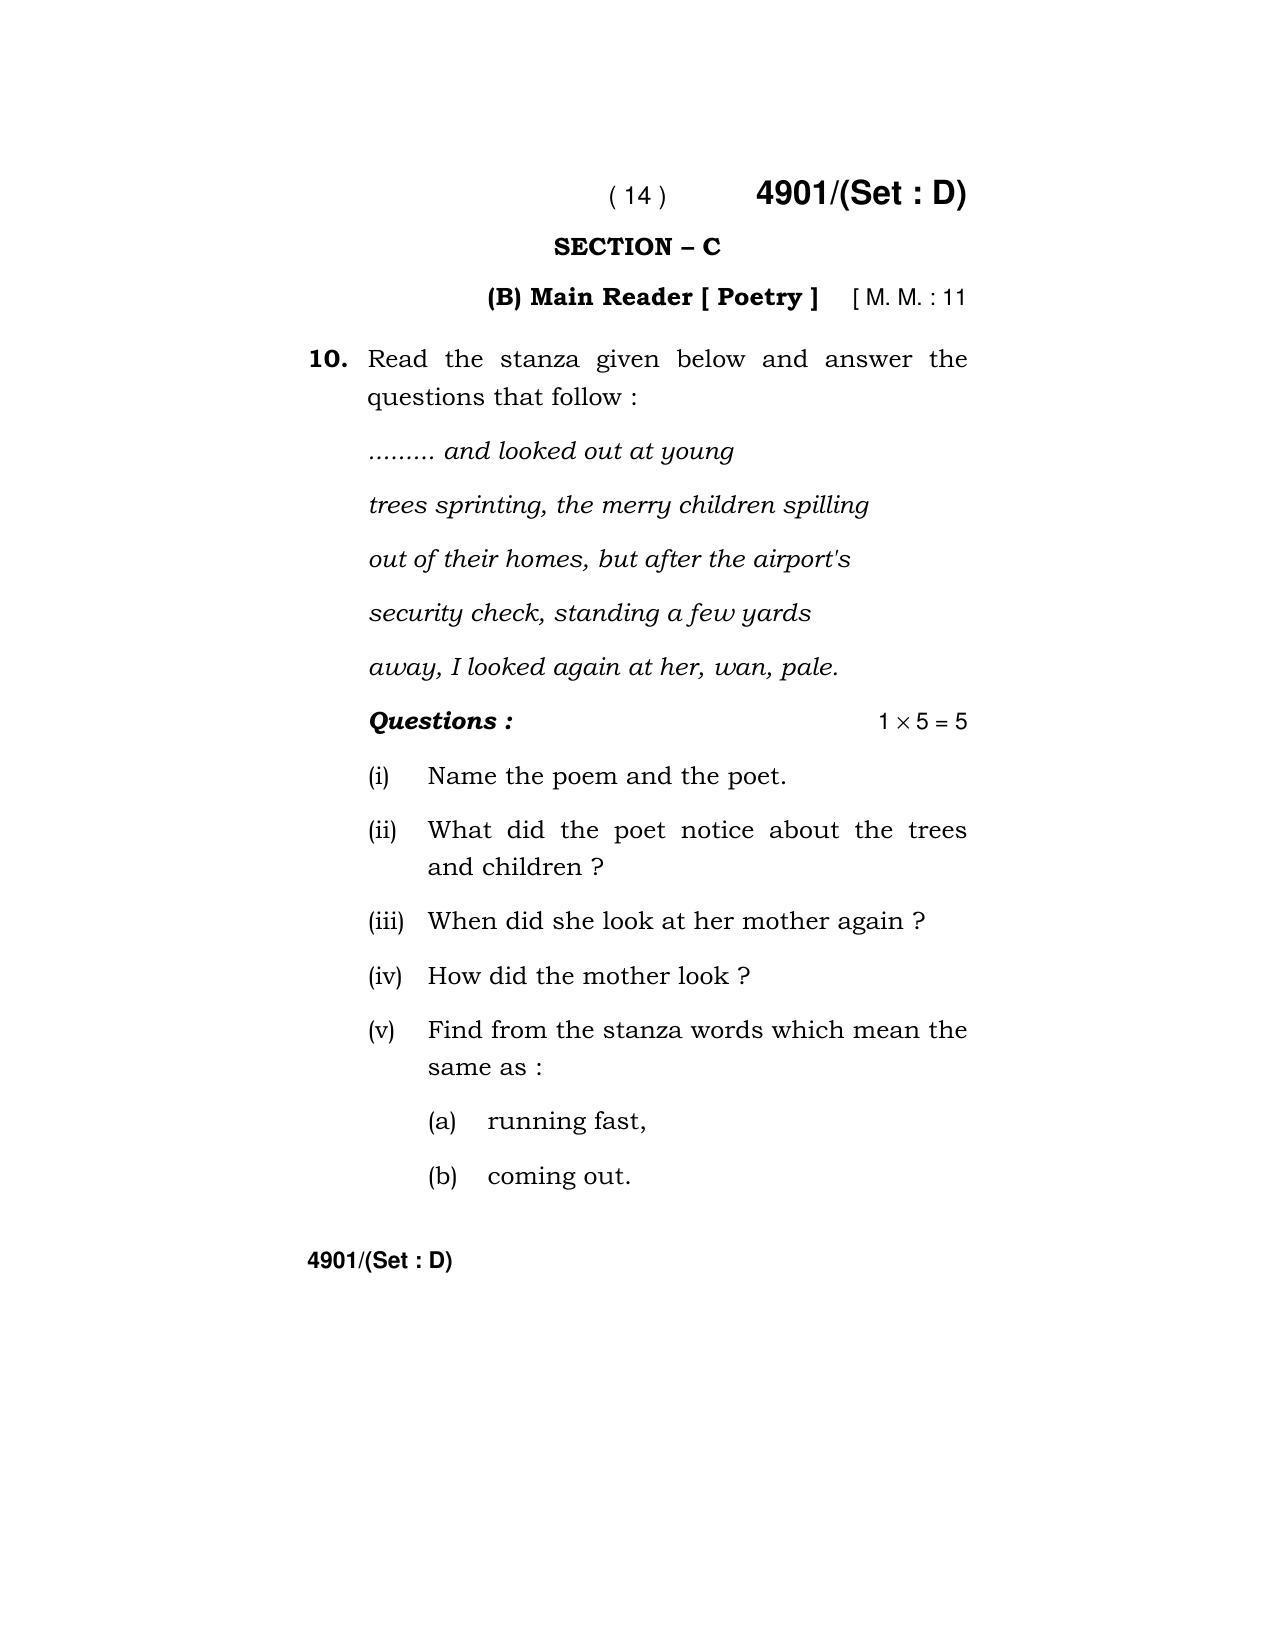 Haryana Board HBSE Class 12 English Core 2020 Question Paper - Page 62